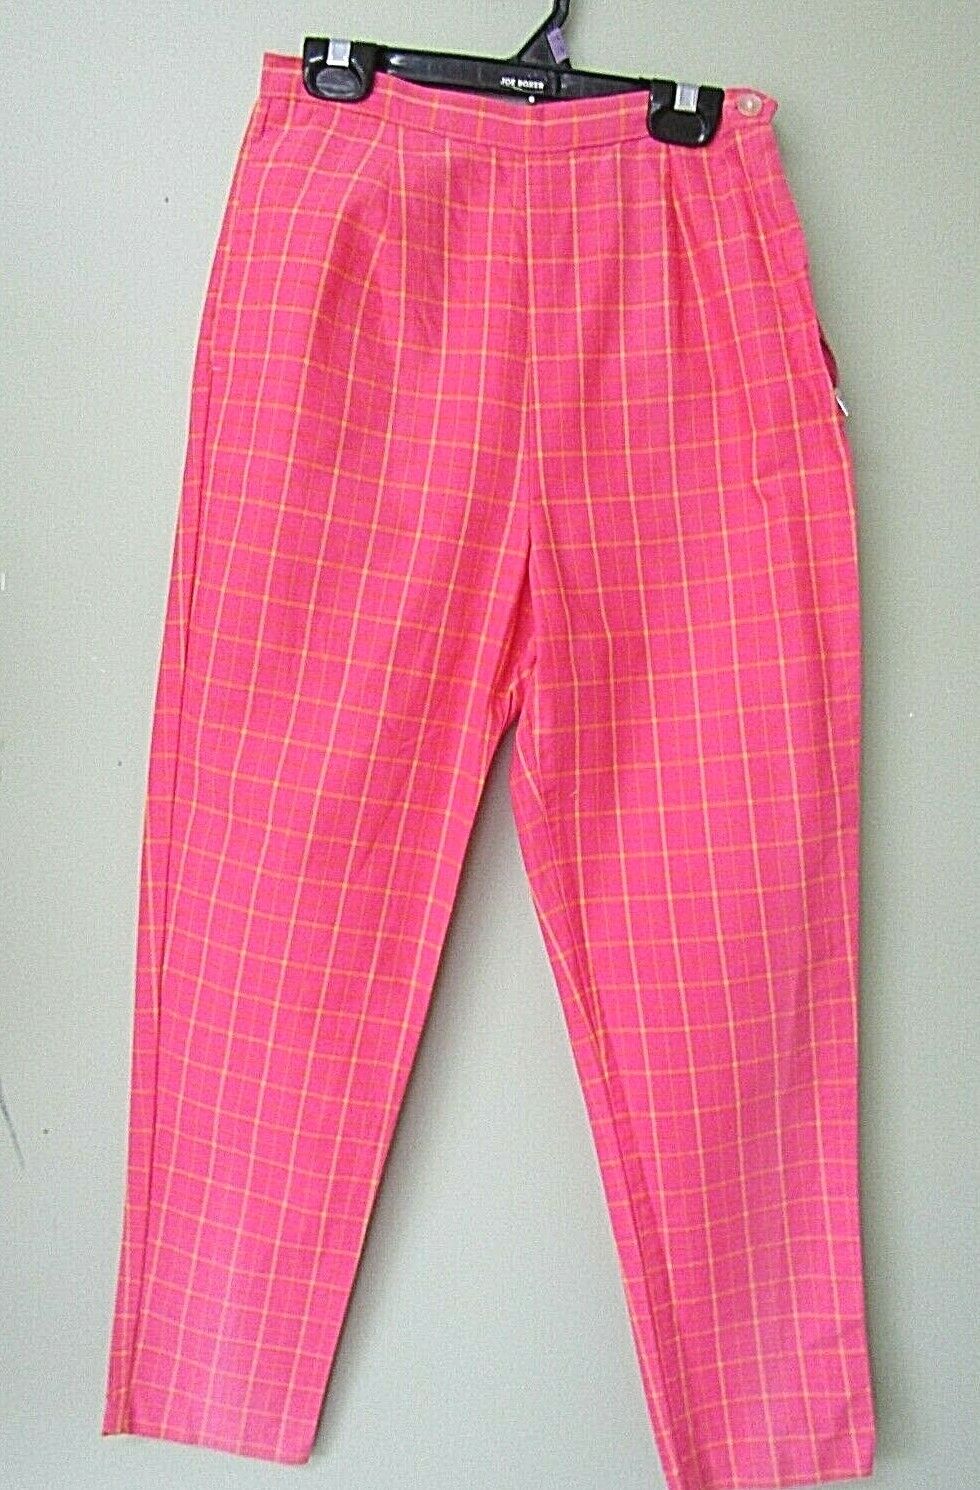 VINTAGE 1950'S PINK & Sales of SALE items from new works YELLOW LEG Max 45% OFF PANTS COTTON PLAID STRAIGHT